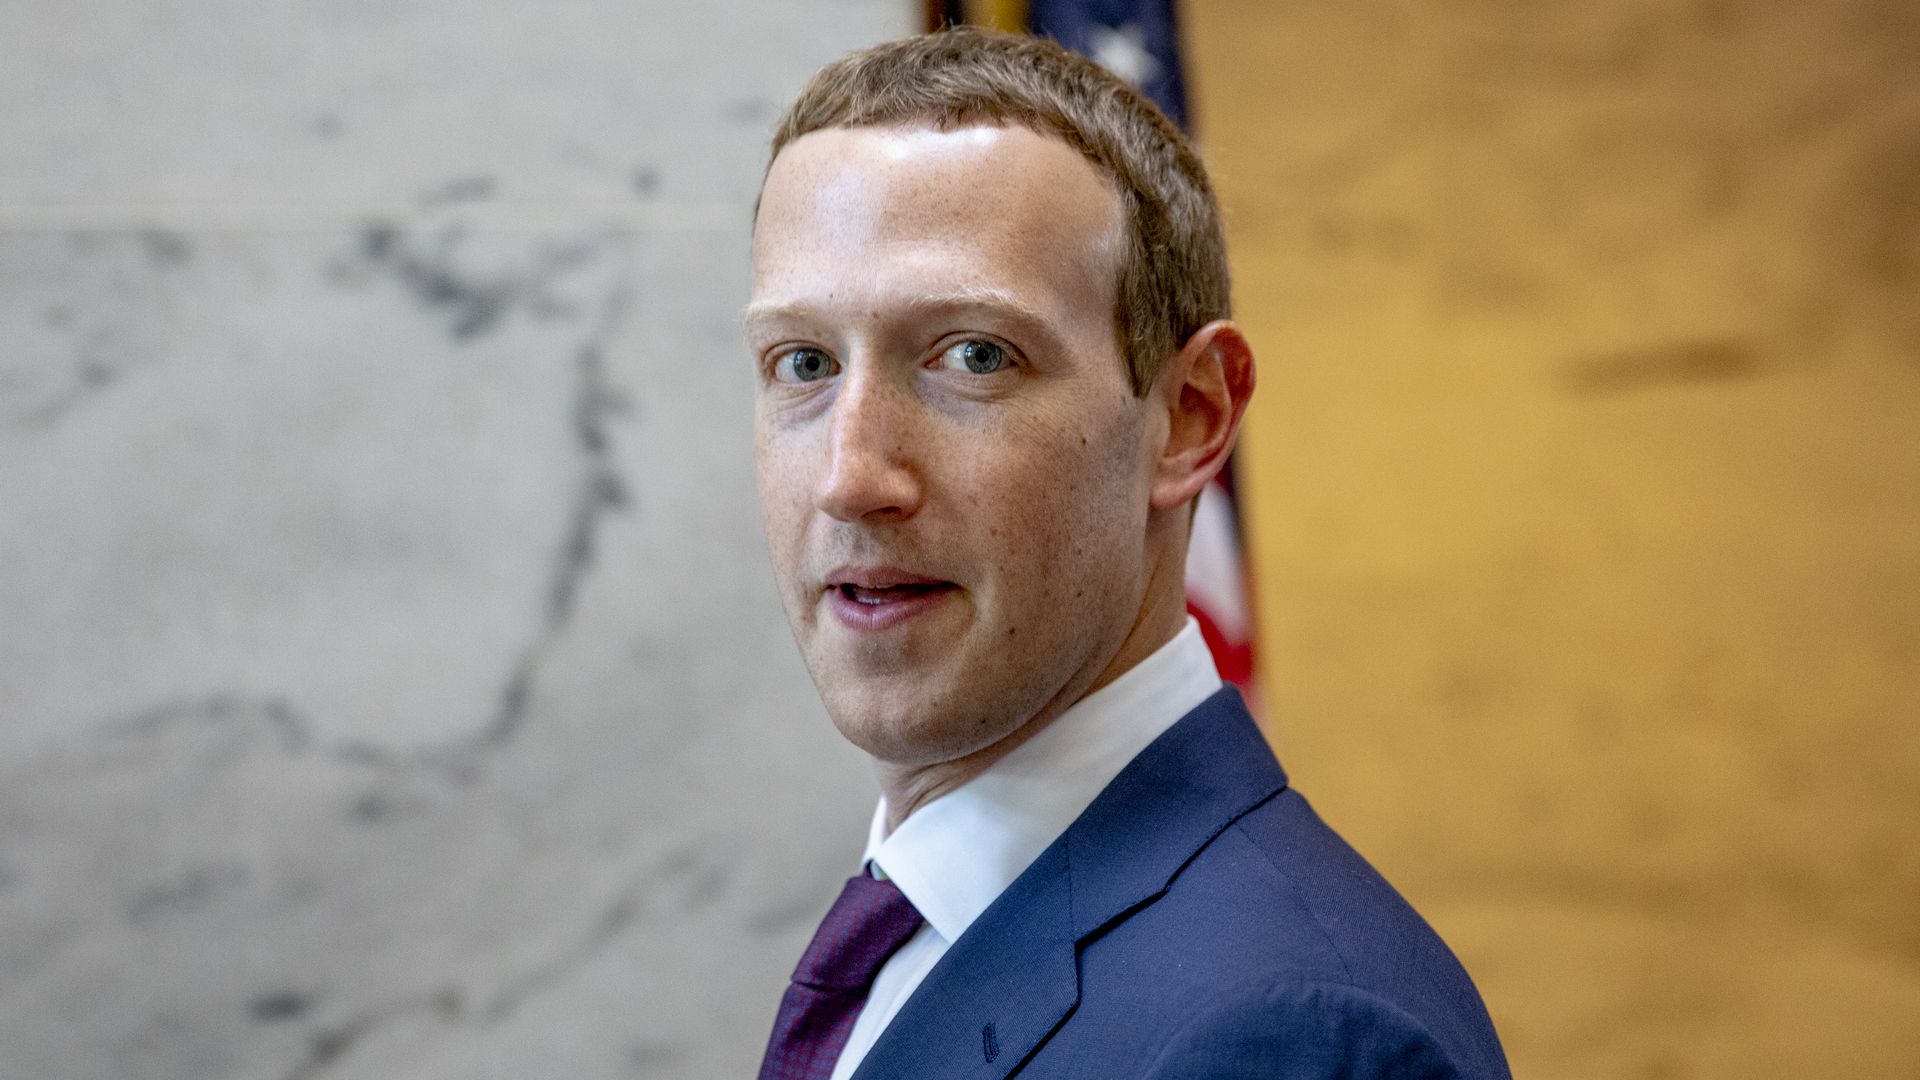 In this image, Zuckerberg's profile is turned away from the camera as he faces it head-on. He's wearing a suit